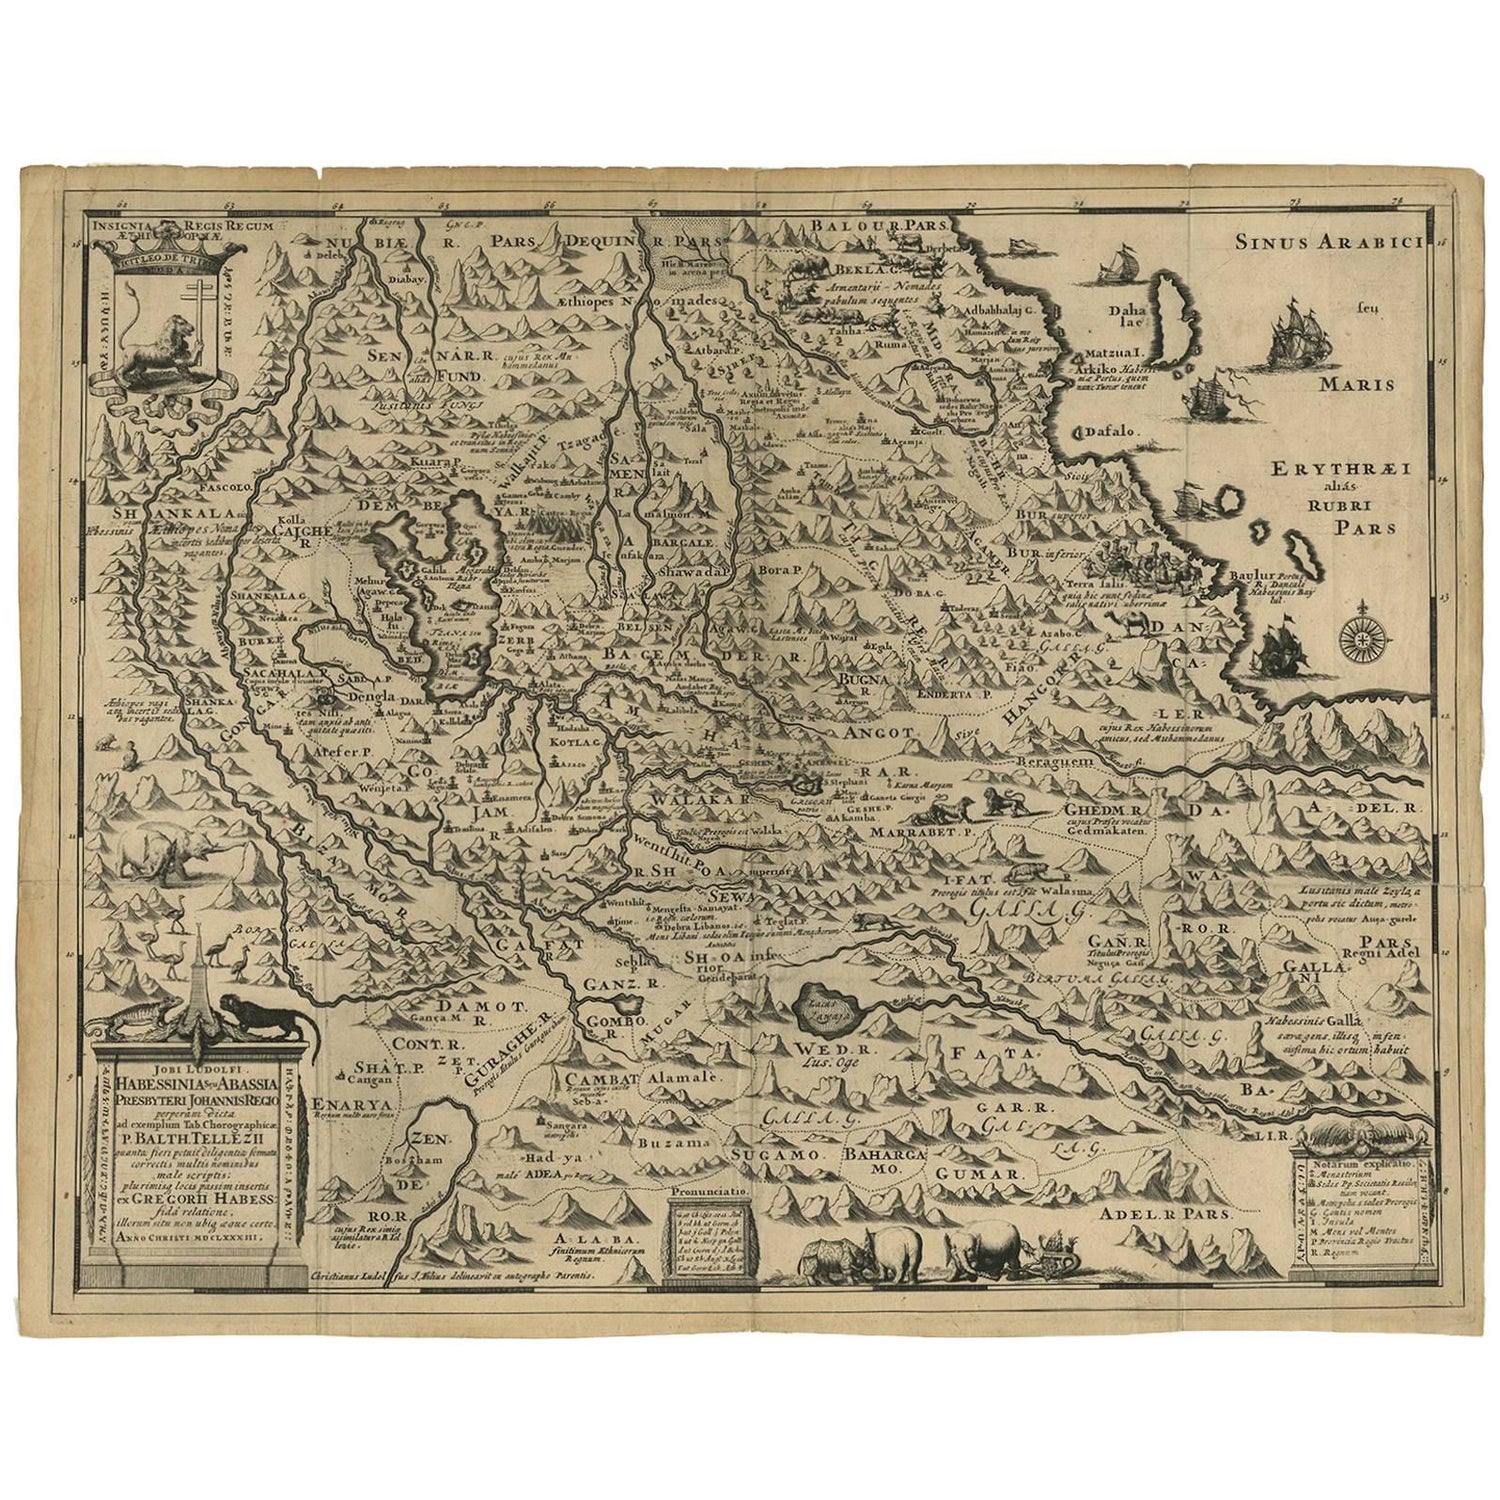 Map of Ethiopia by Vansleb’s mentor Hiob Ludolf, drawn by Christian Ludolf, published in Amsterdam 1683.